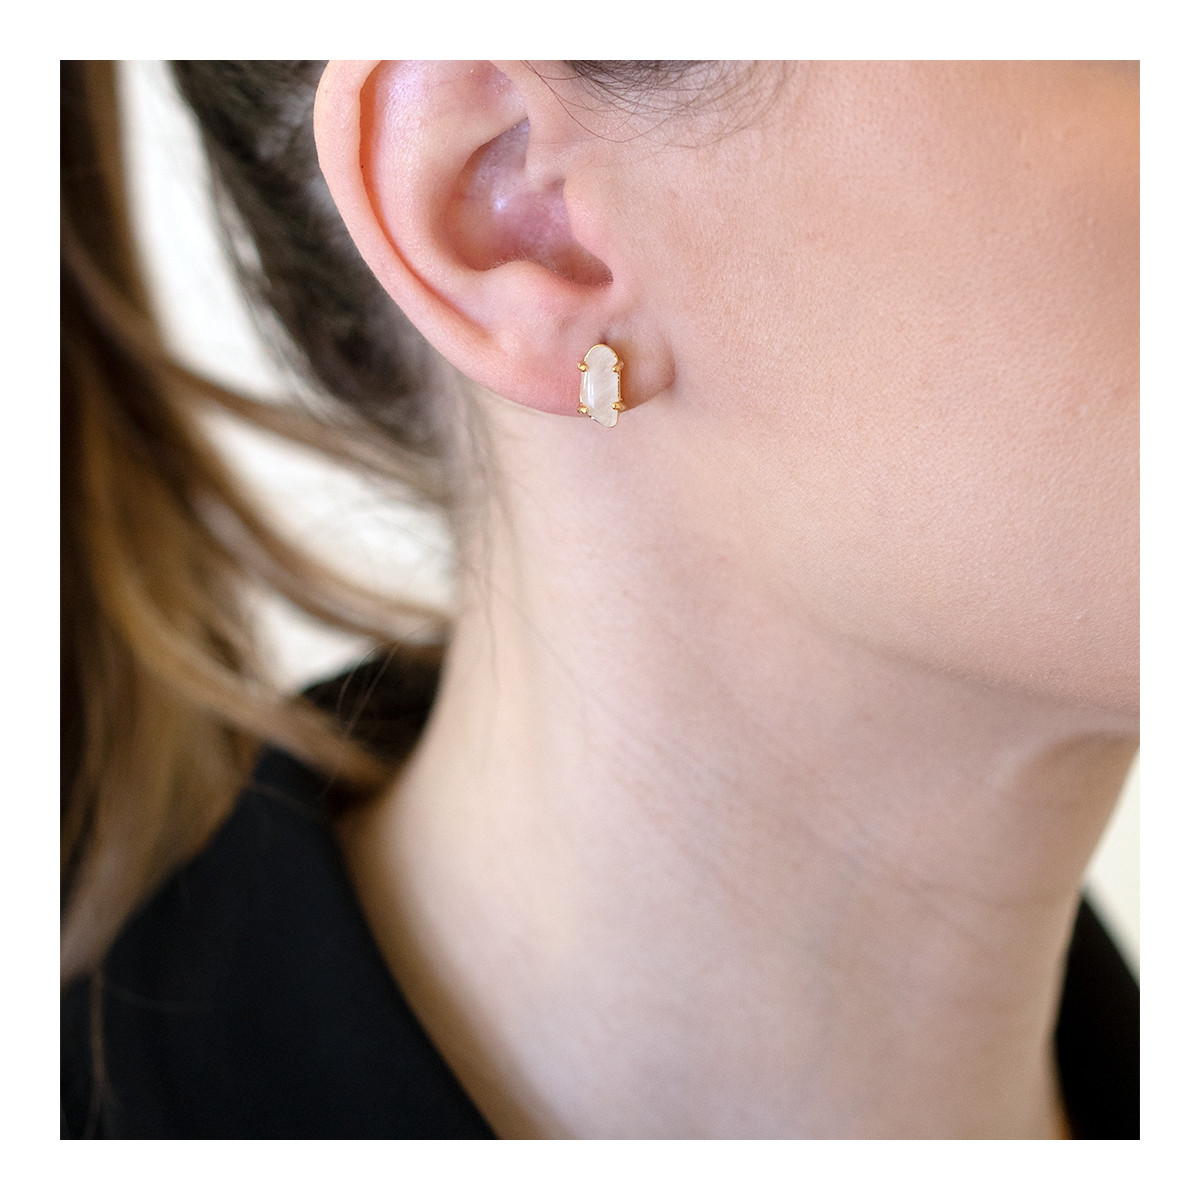 GOLDEN EARRINGS WITH WHITE STONE